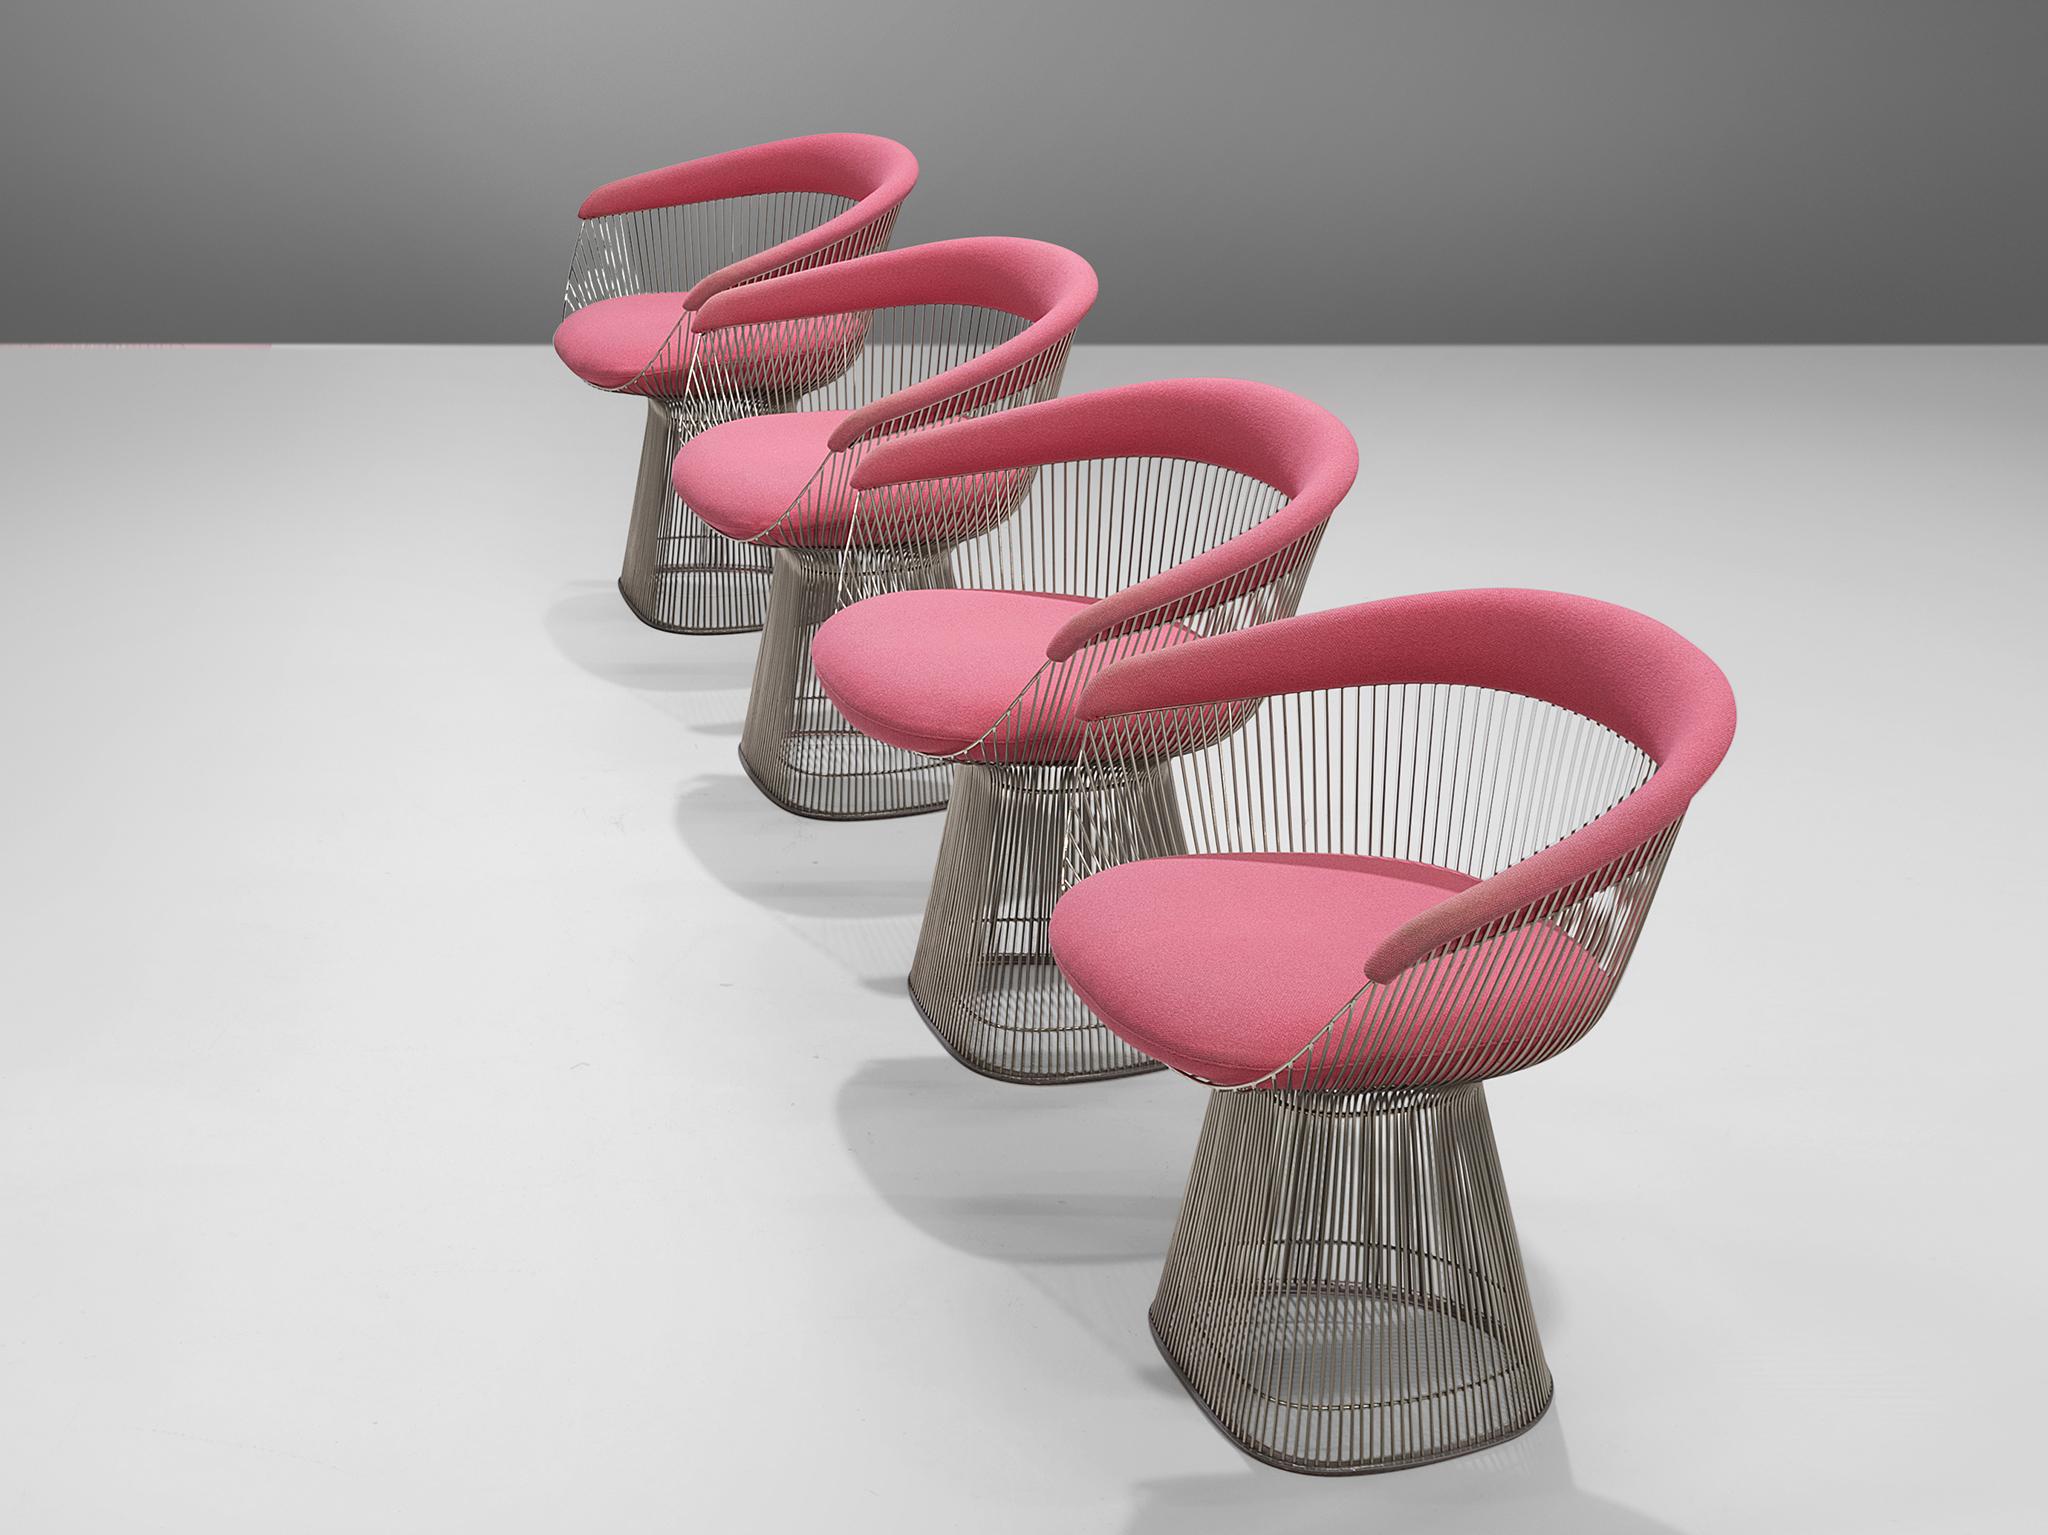 Warren Platner for Knoll, set of four lounge chairs, metal, fabric, United States, 1966. 

This iconic pink set by Warren Platner (1919-2006) is created by welding curved steel rods to circular and semi-circular frames, simultaneously serving as